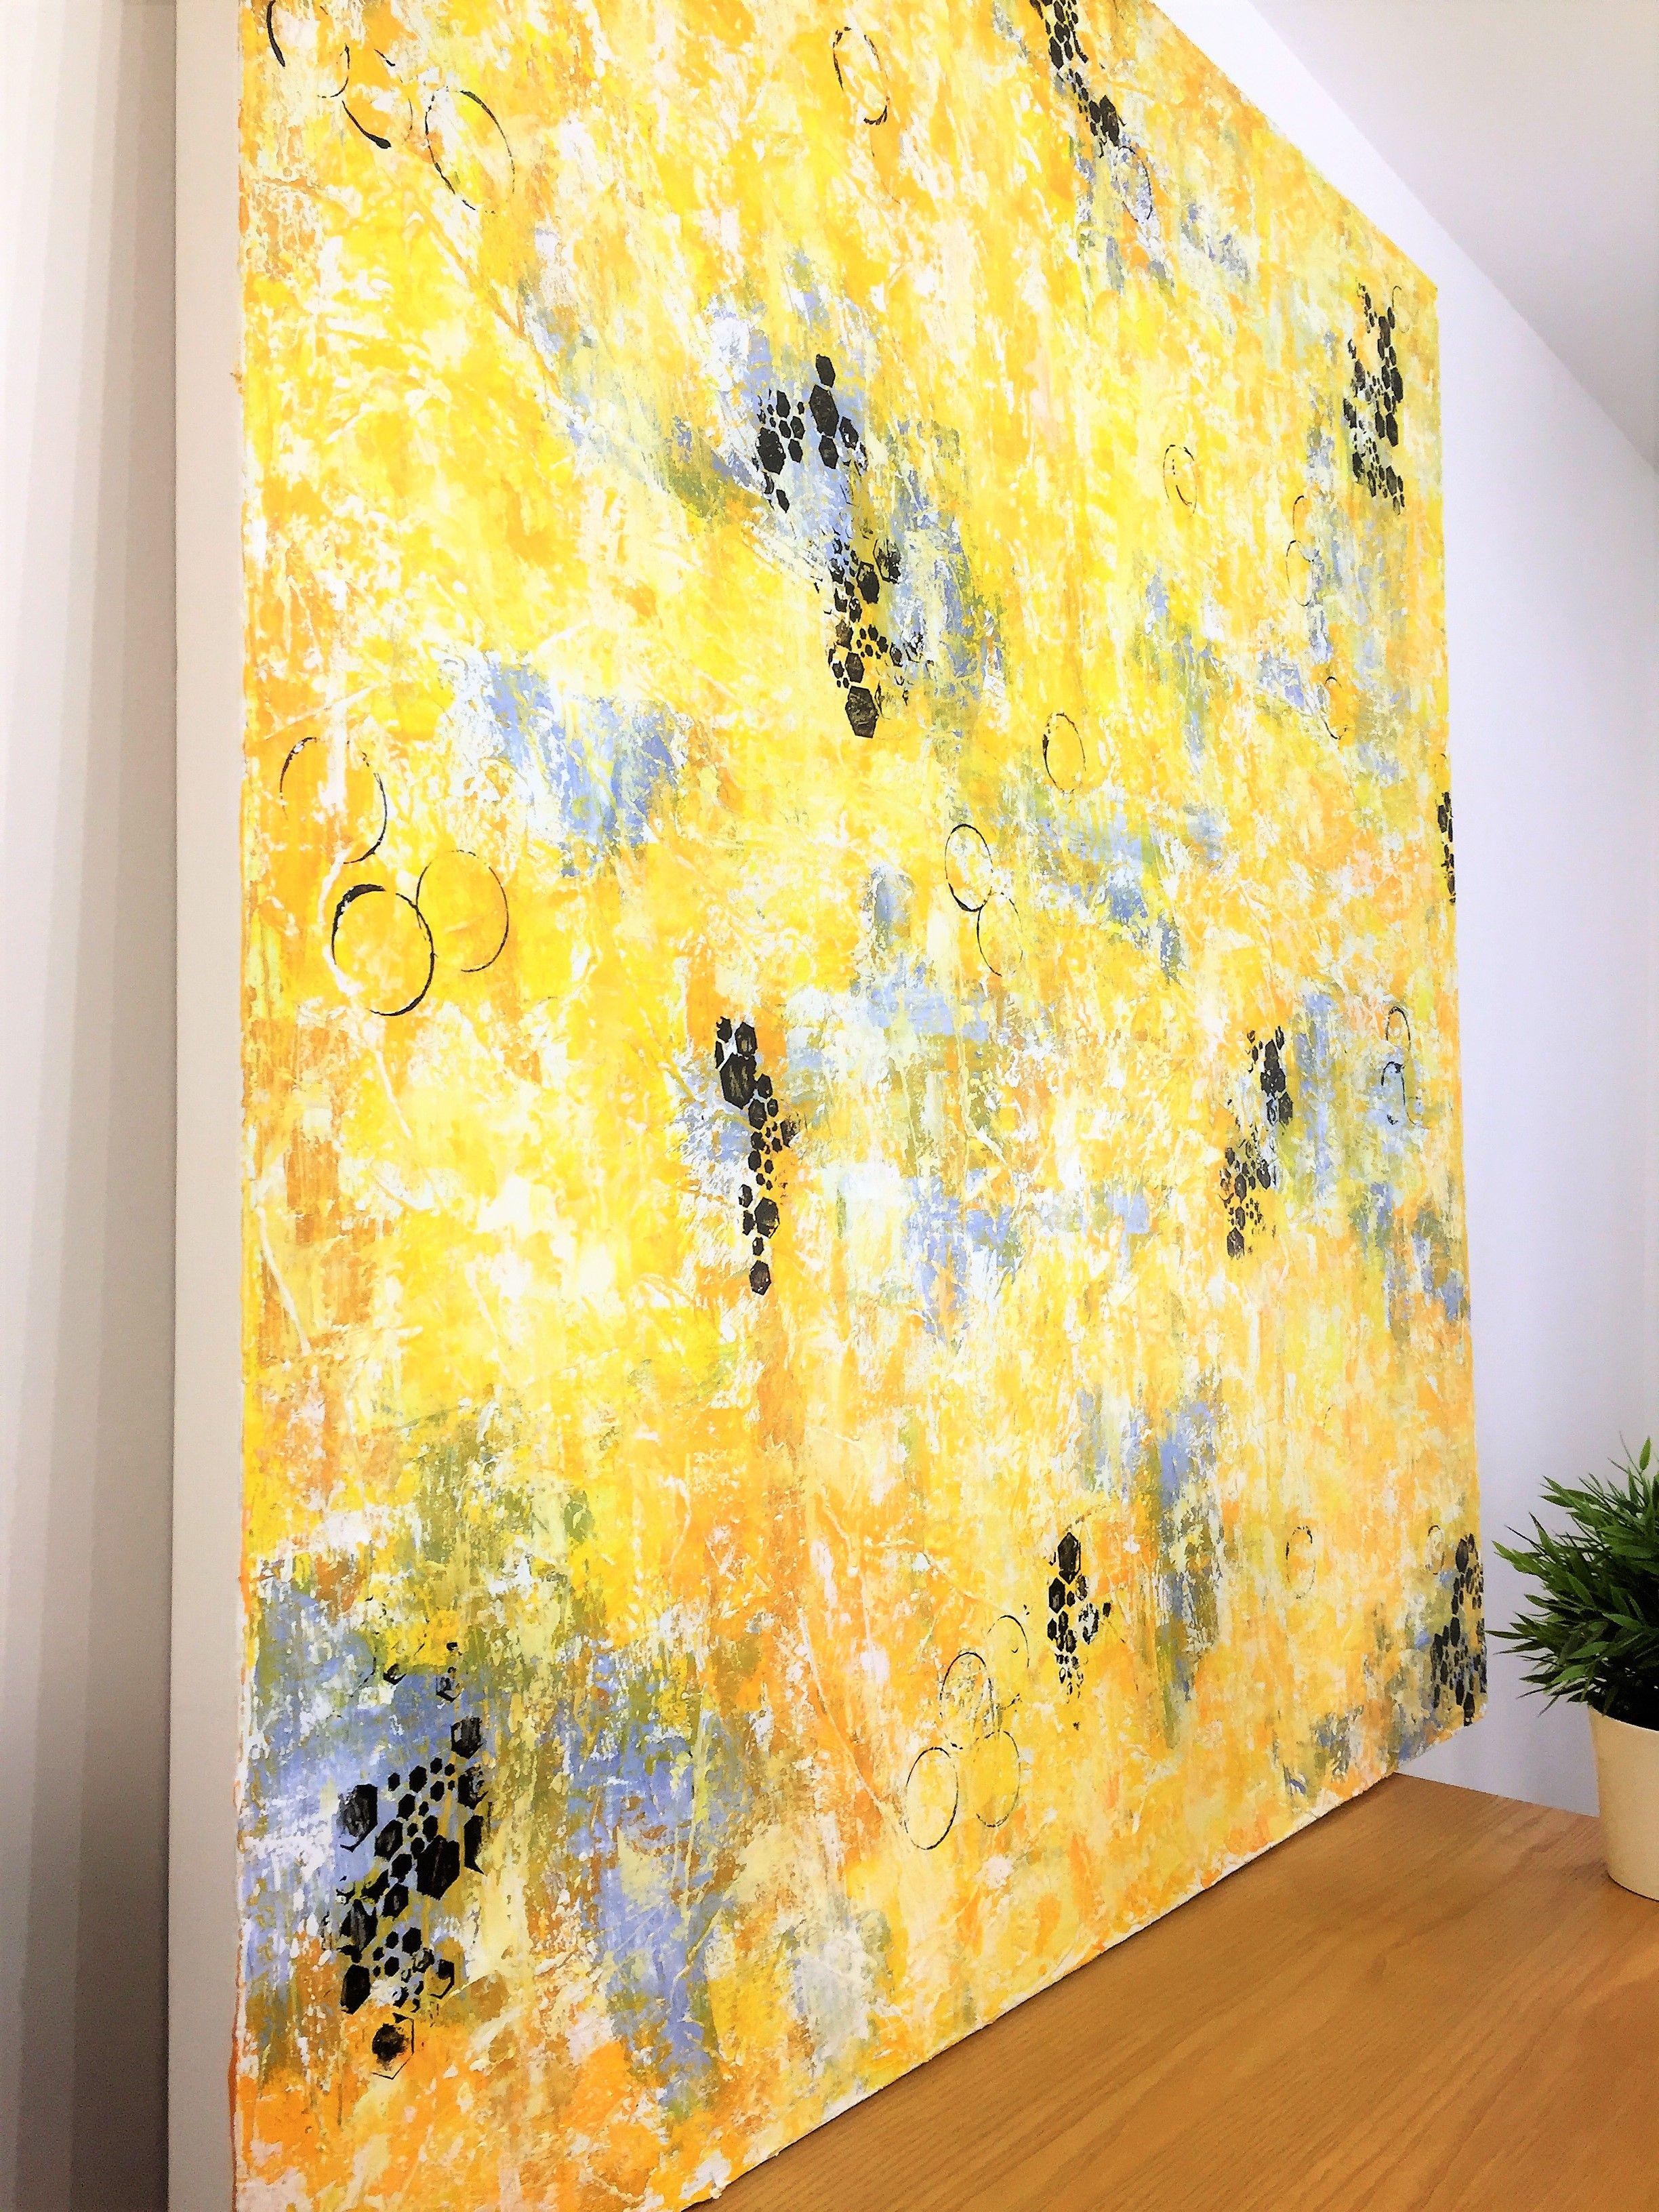 Warm Light - abstract, Painting, Acrylic on Canvas - Yellow Abstract Painting by Cristina Stefan